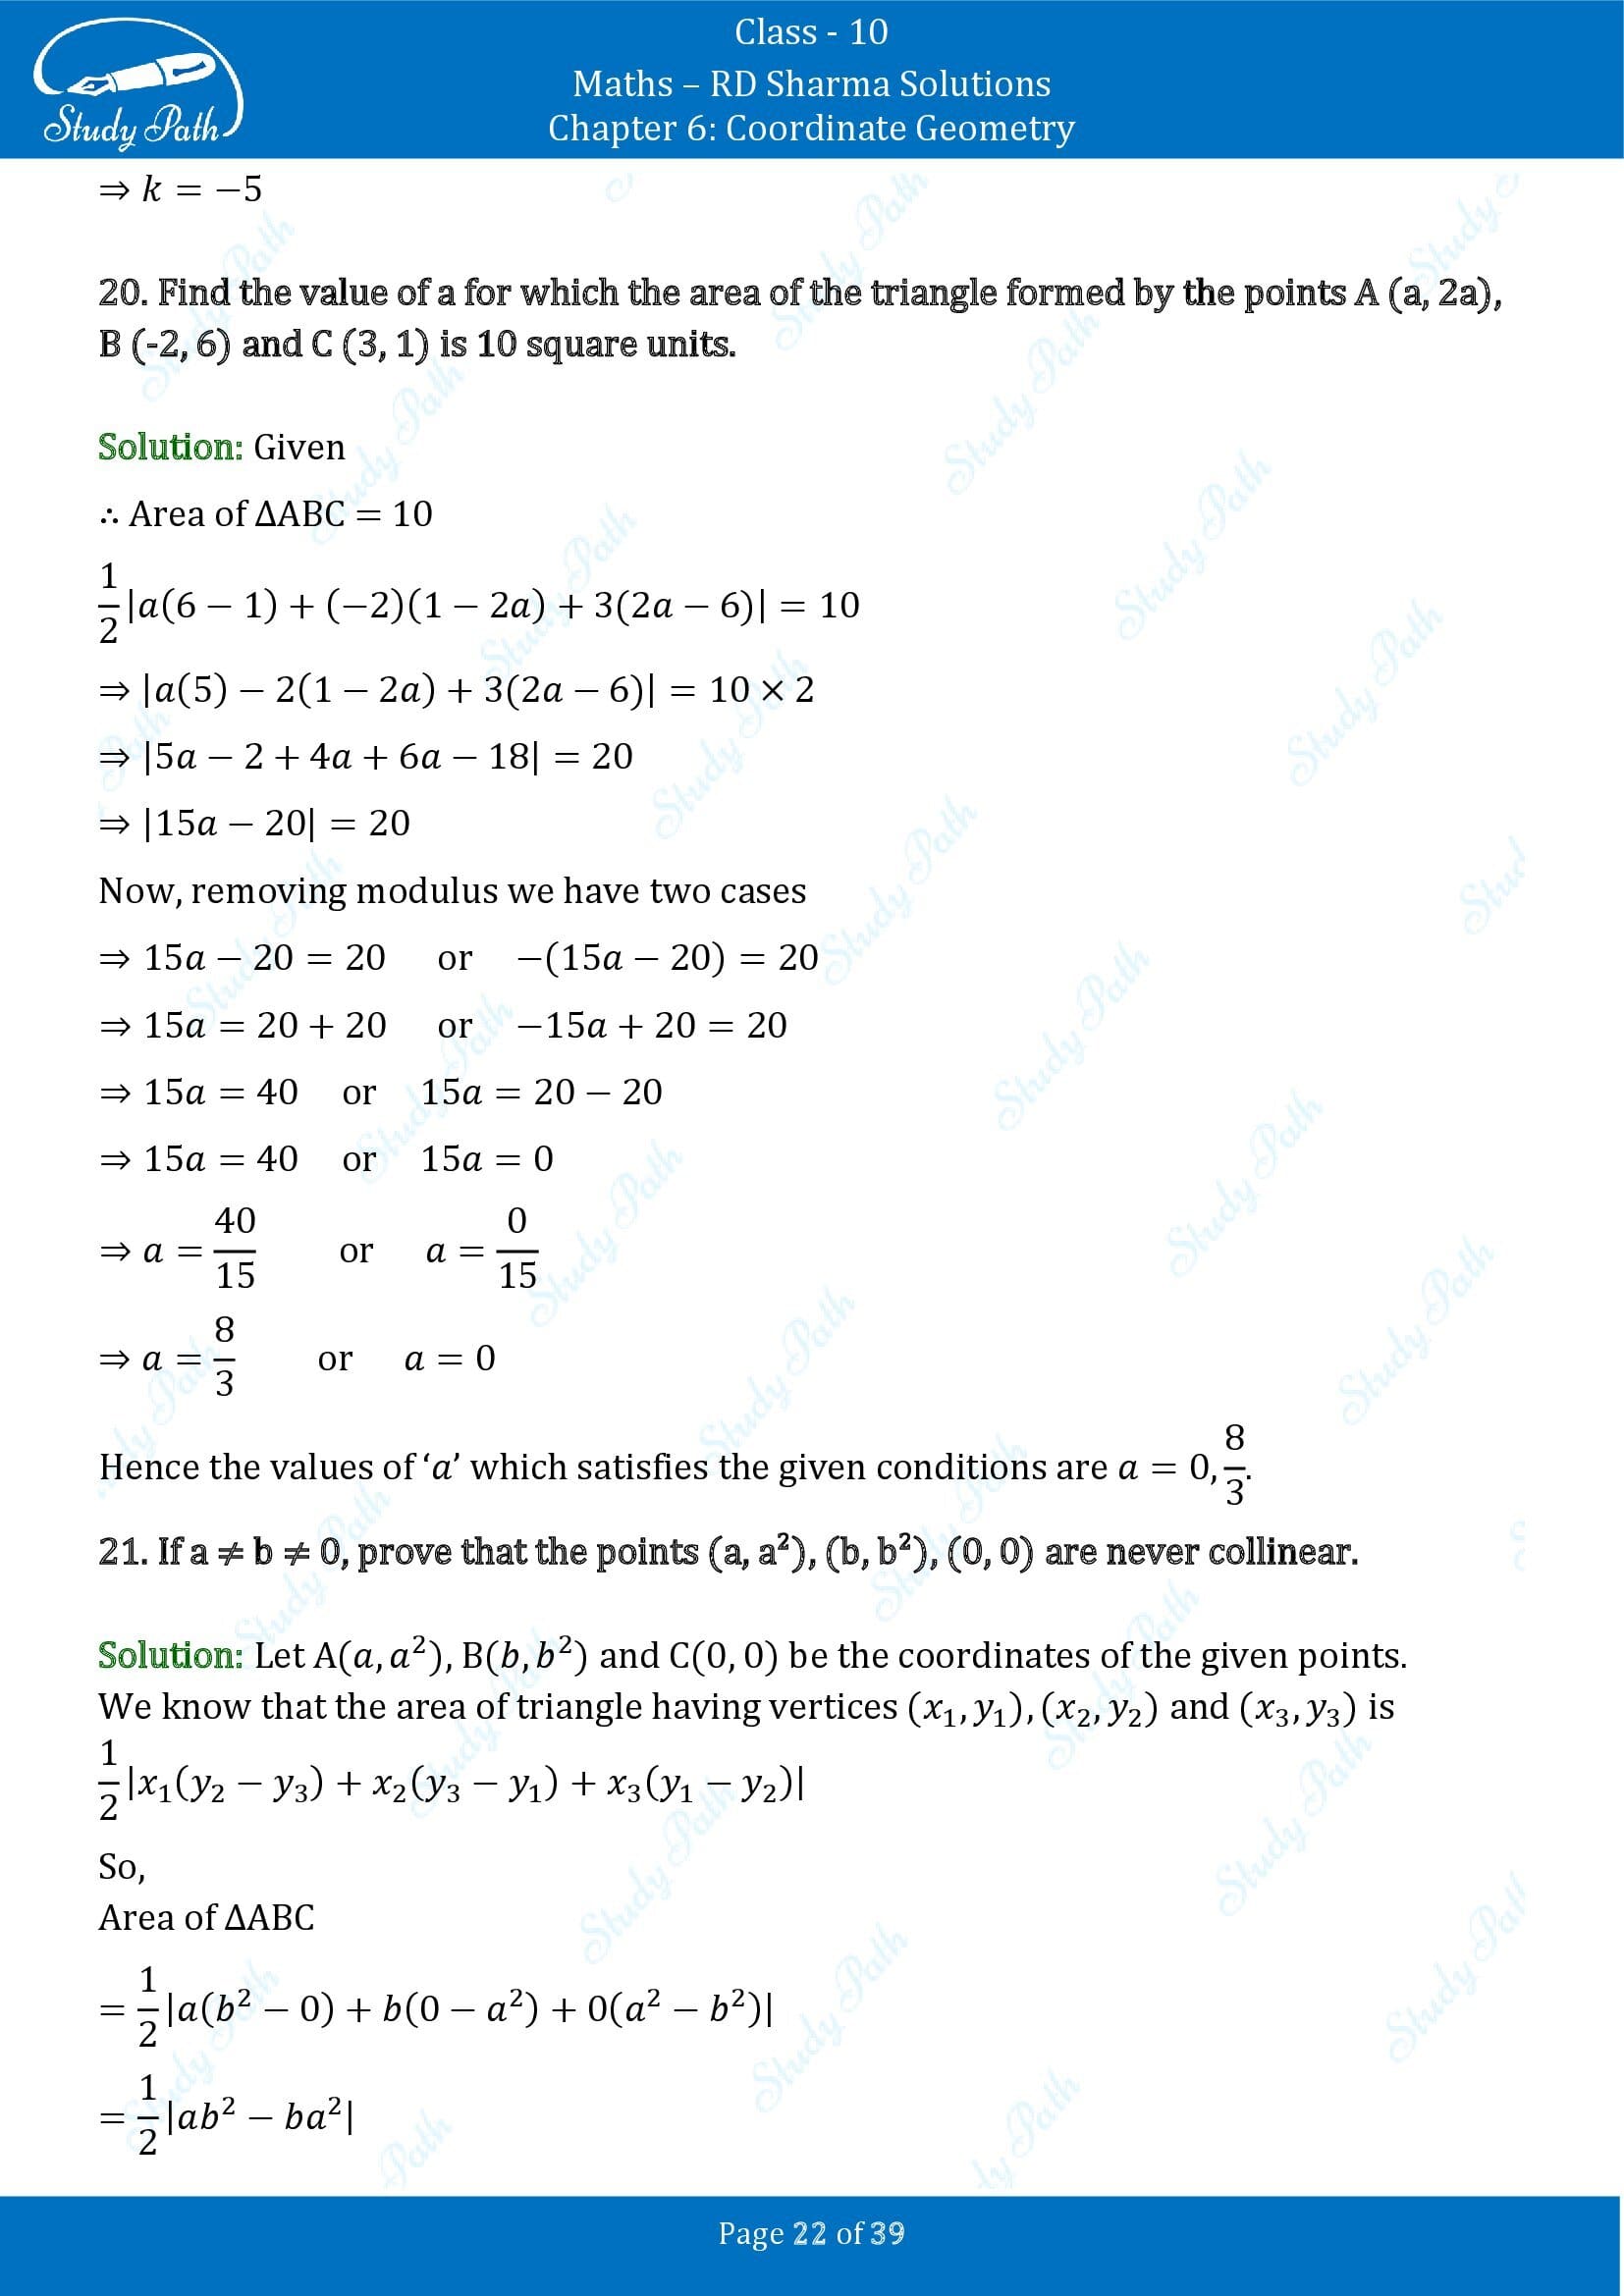 RD Sharma Solutions Class 10 Chapter 6 Coordinate Geometry Exercise 6.5 0022